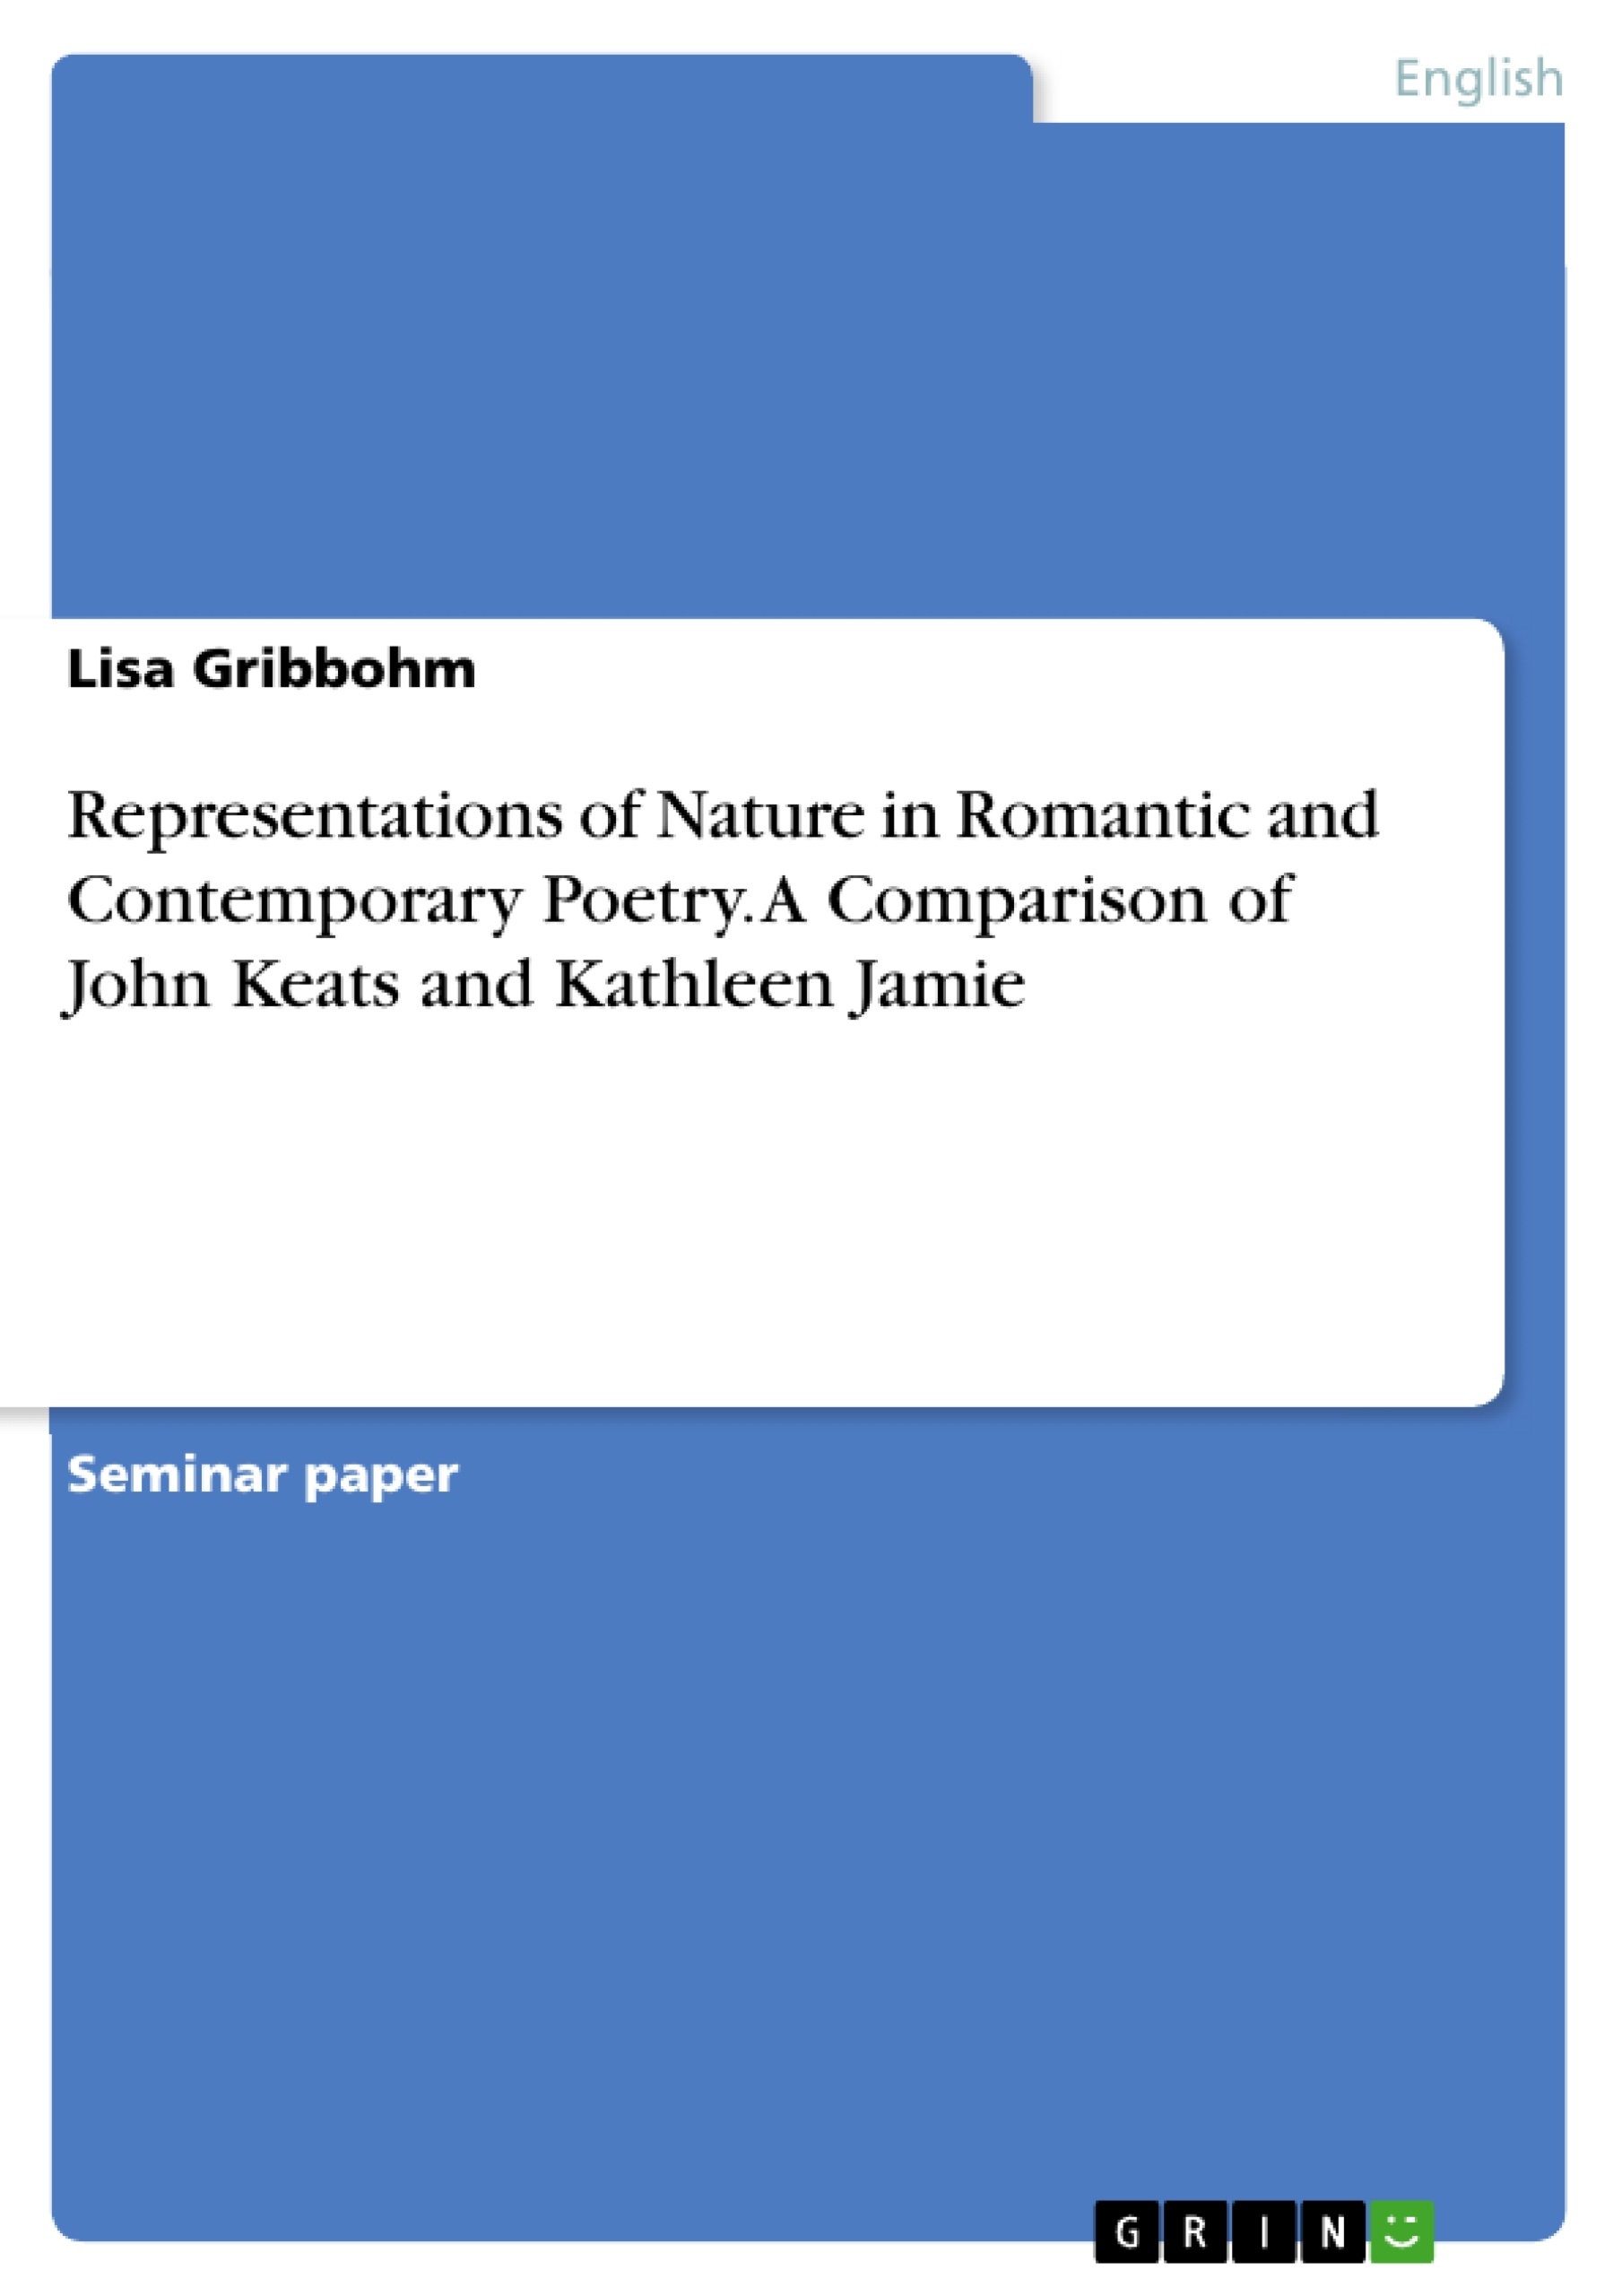 Título: Representations of Nature in Romantic and Contemporary Poetry. A Comparison of John Keats and Kathleen Jamie